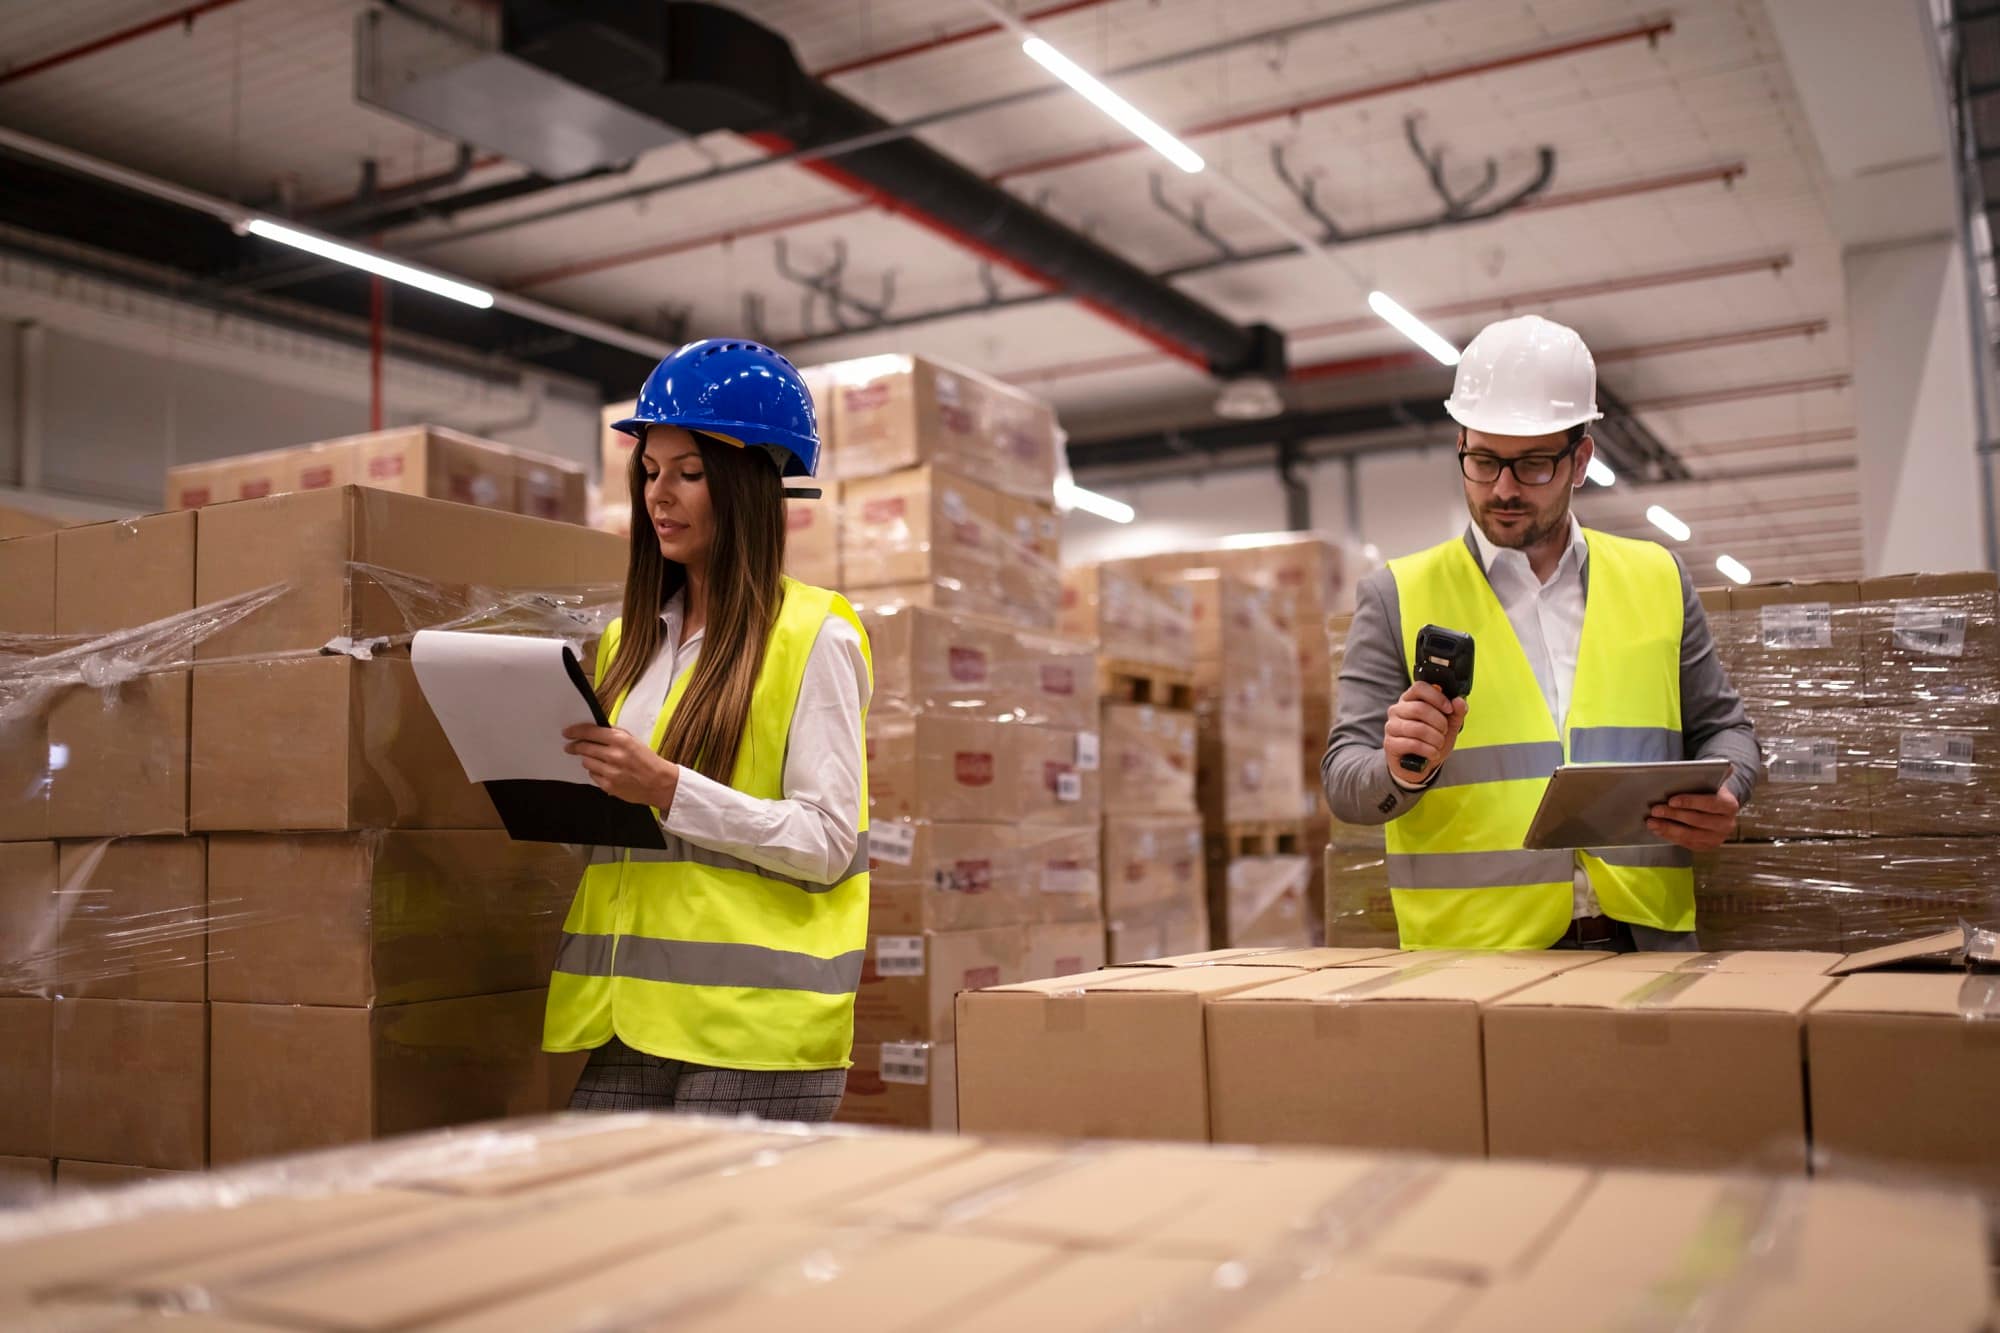 What Every Business Should Learn about Inventory Management